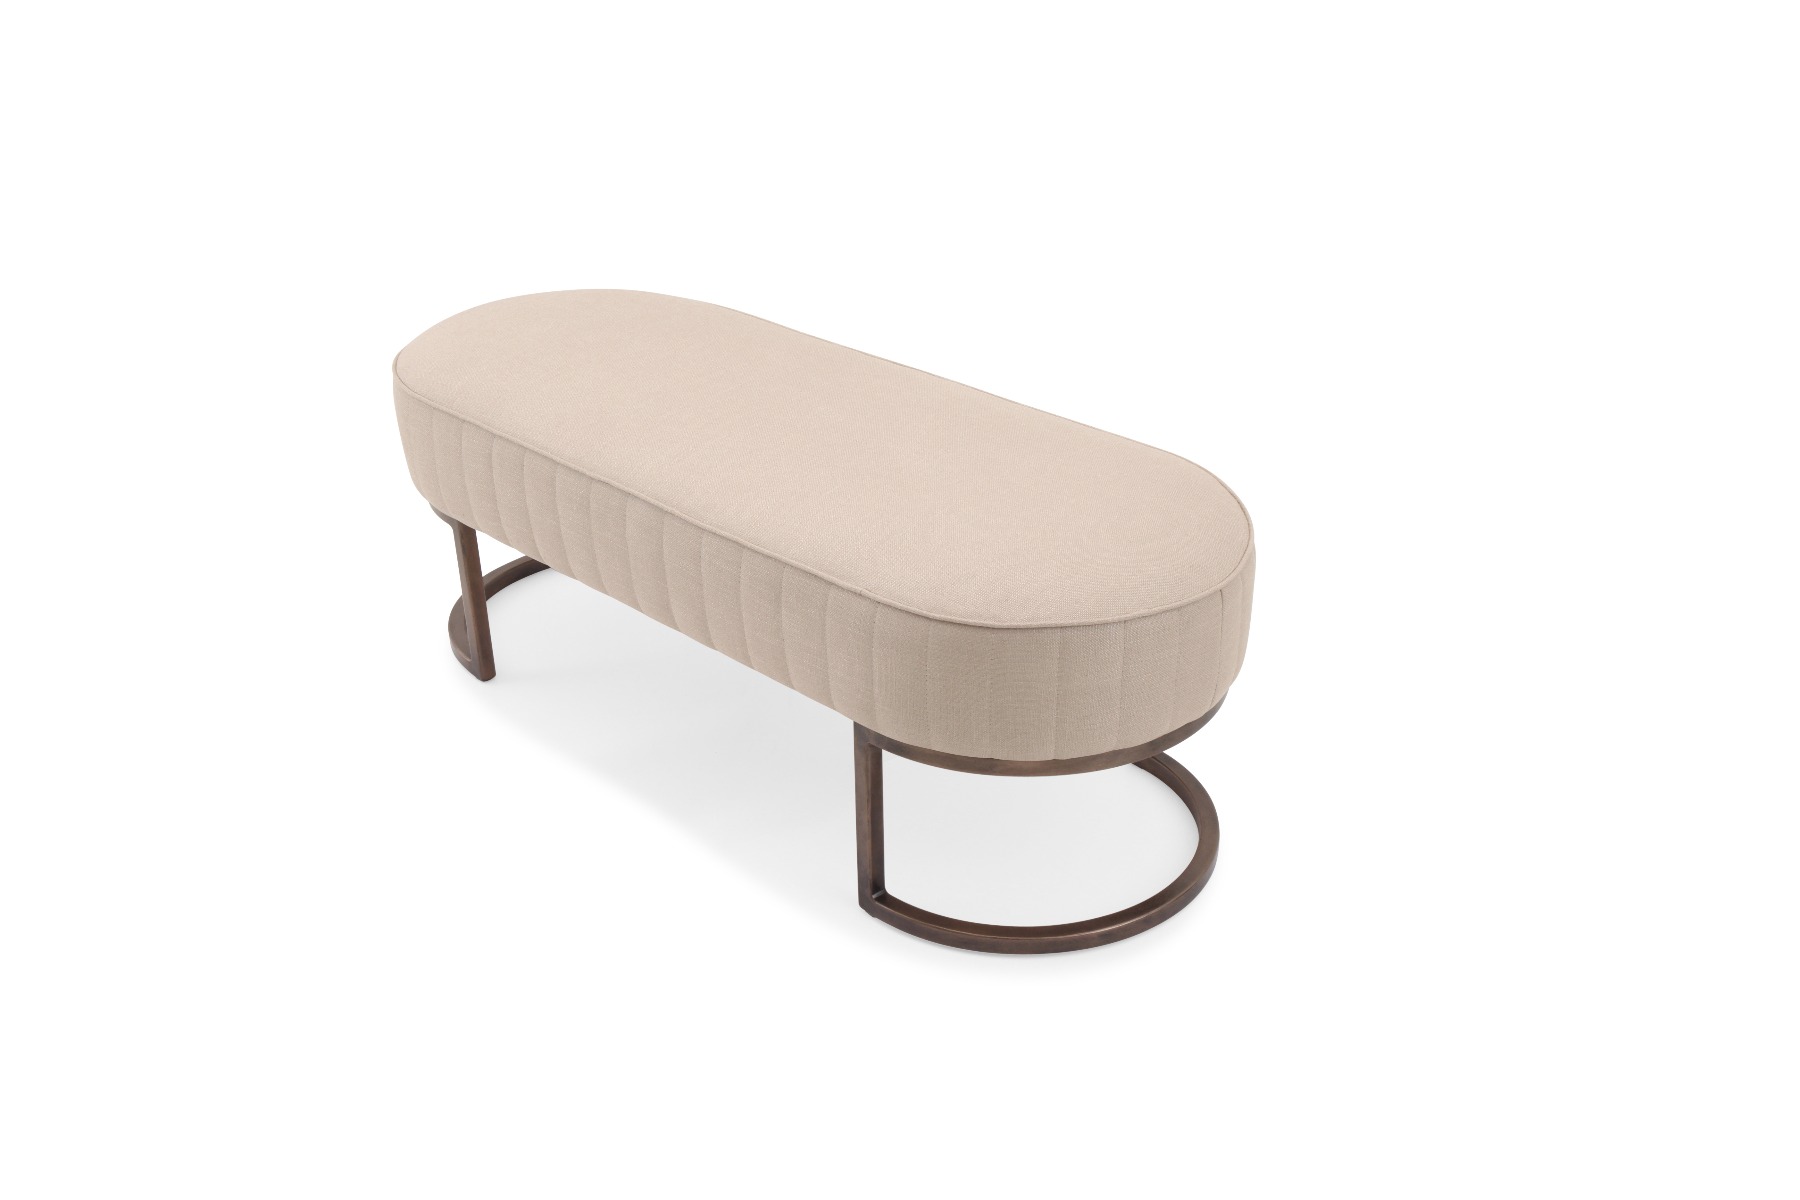 Luxury Stanmore cream bench furniture by Luxuria London